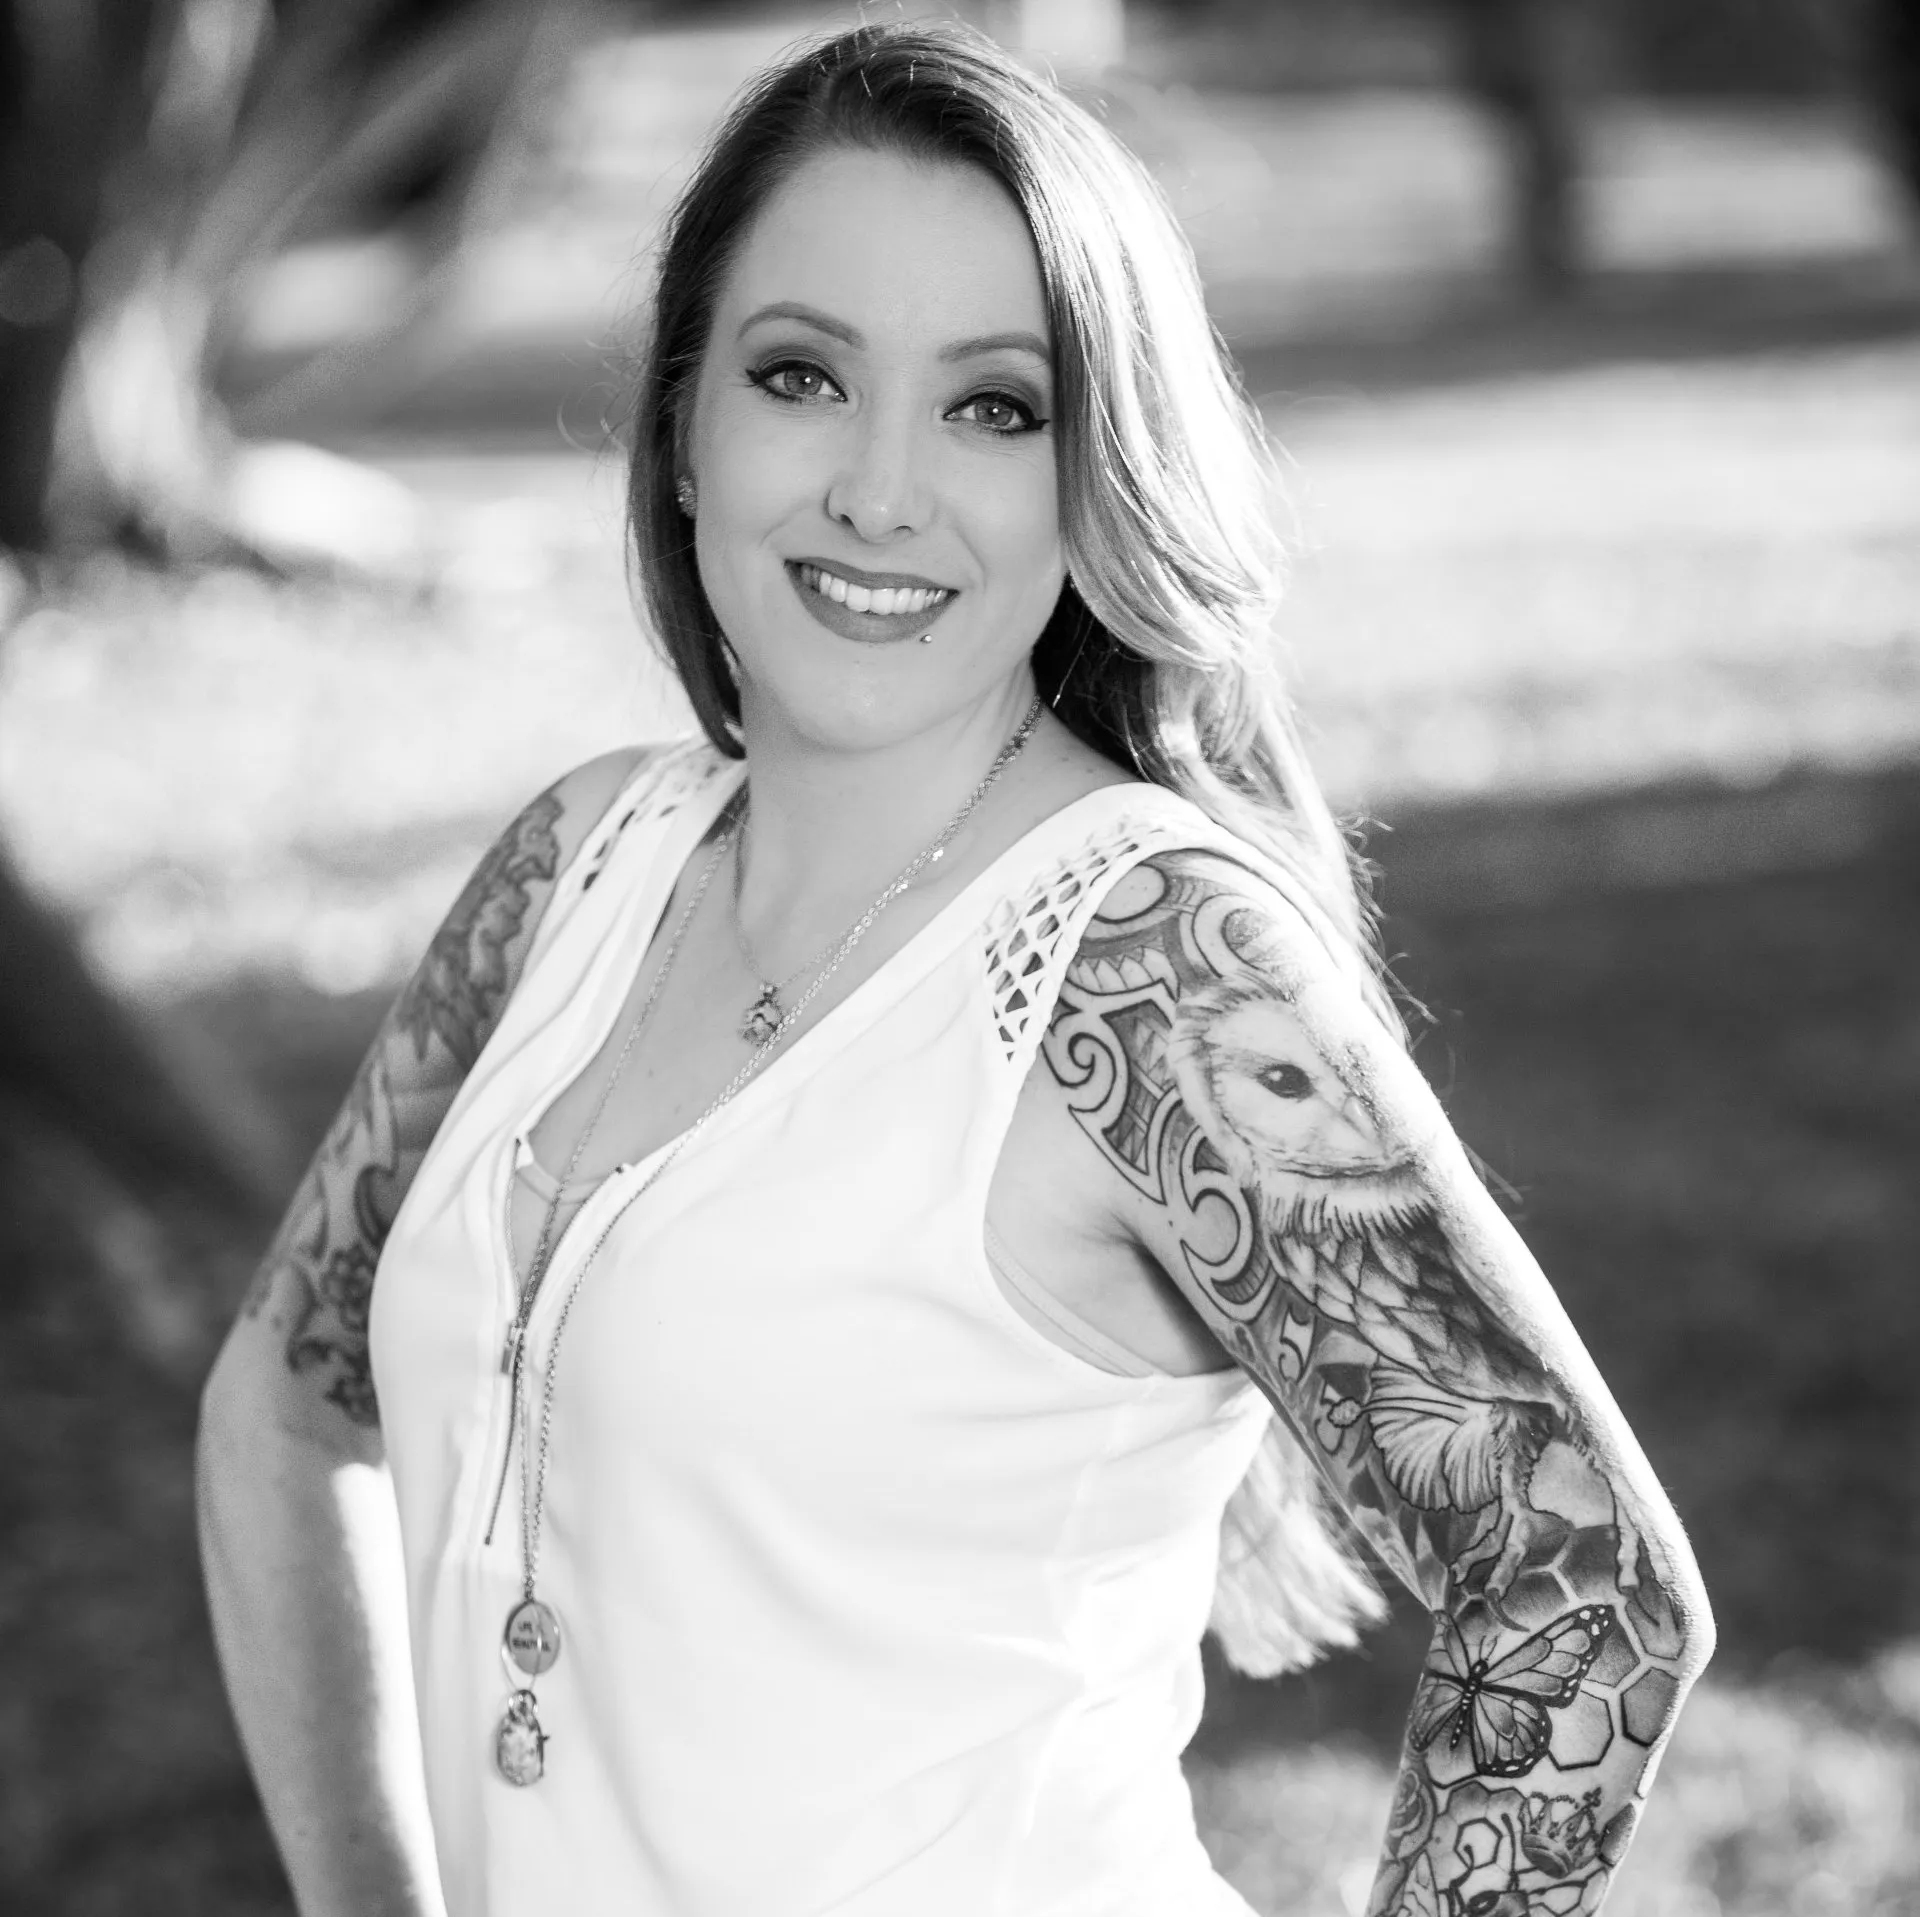 A black and white photo of a woman with tattoos on her arms.